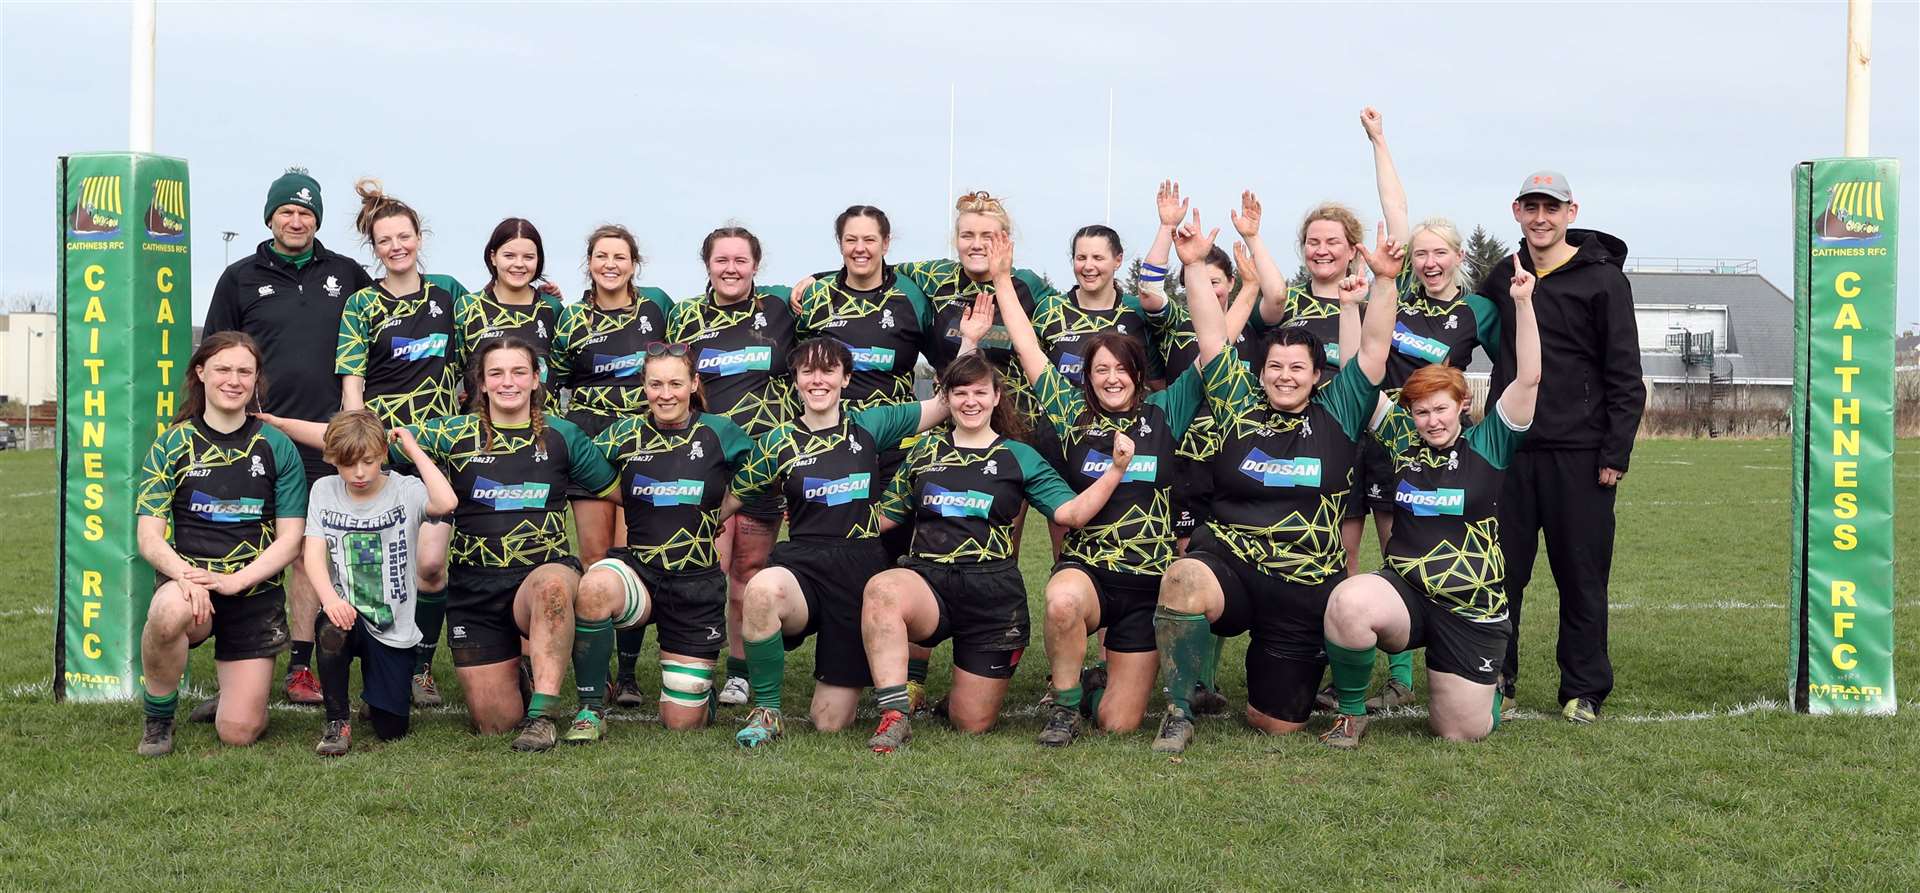 Caithness Krakens at Millbank on Sunday celebrating their first victory over Orkney Dragons. Picture: James Gunn